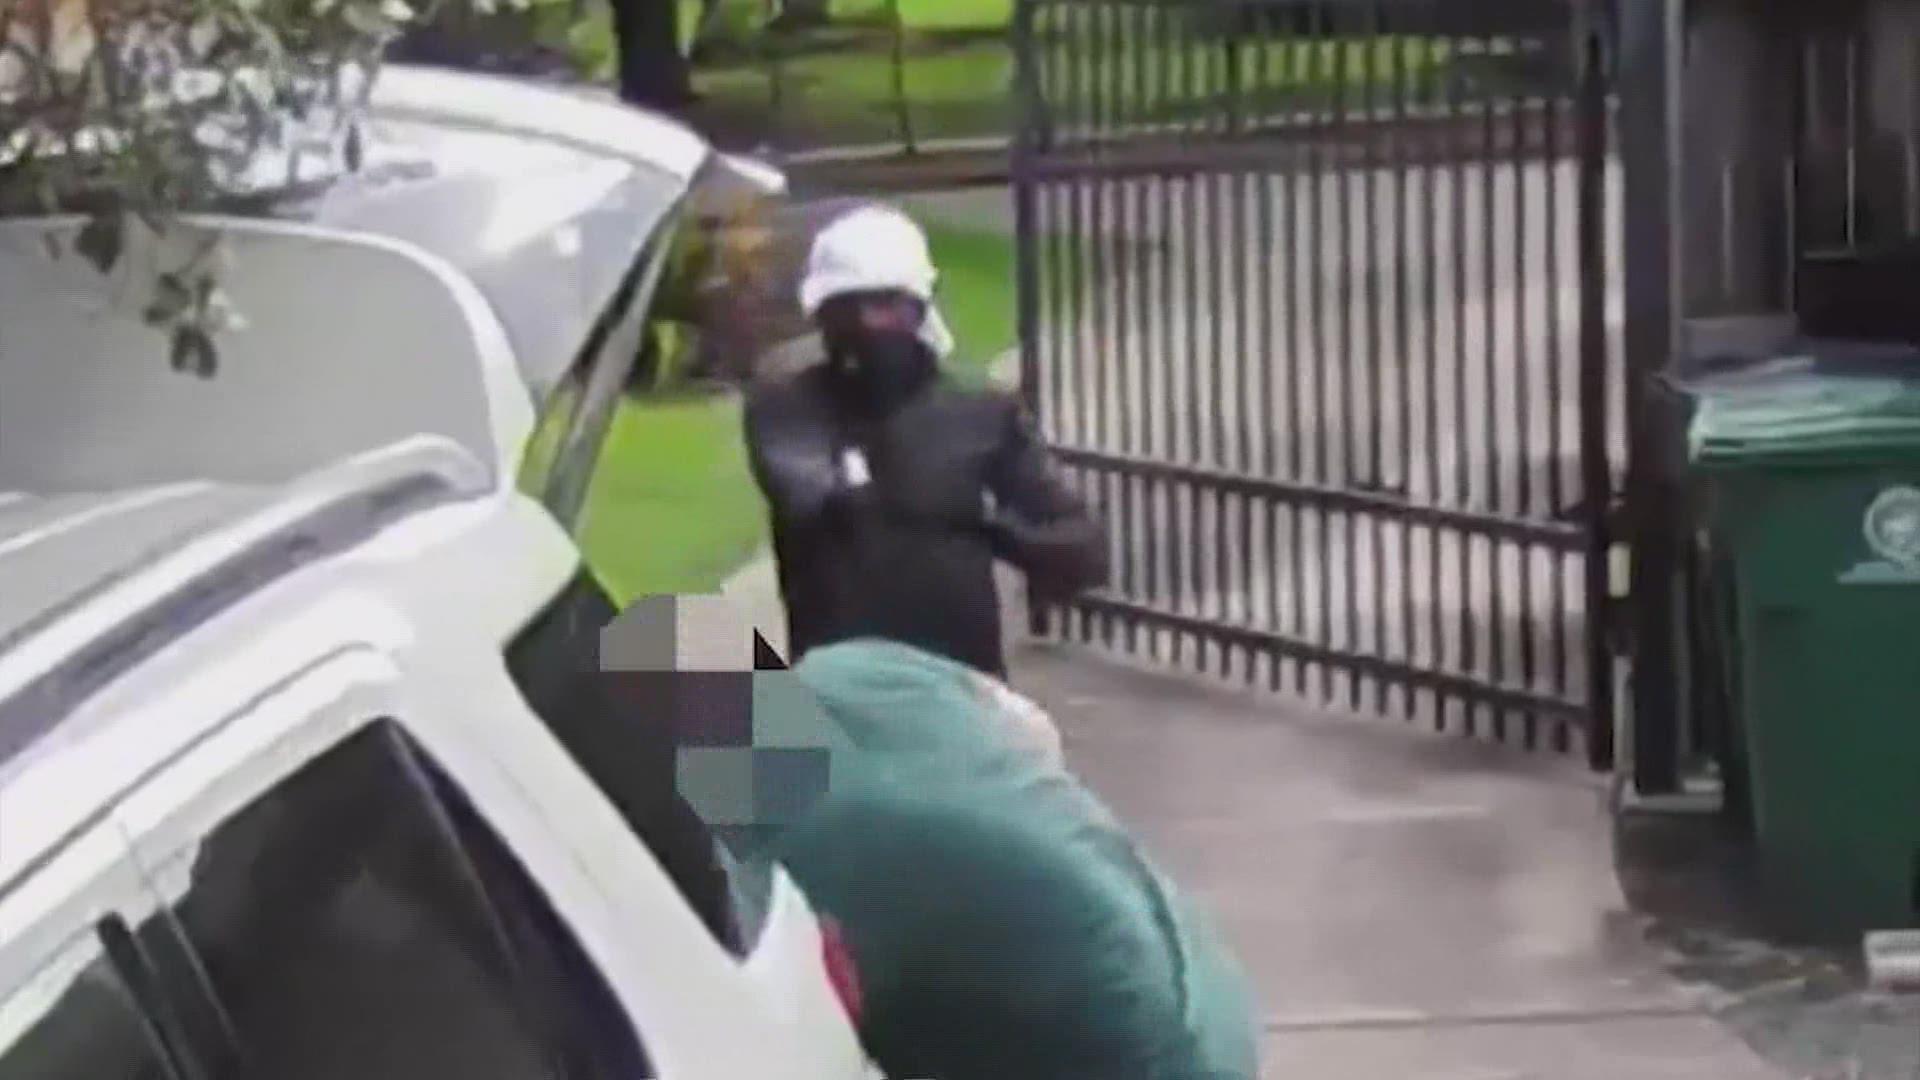 Houston police have released video showing a man getting robbed at gunpoint while loading his vehicle in southwest Houston.